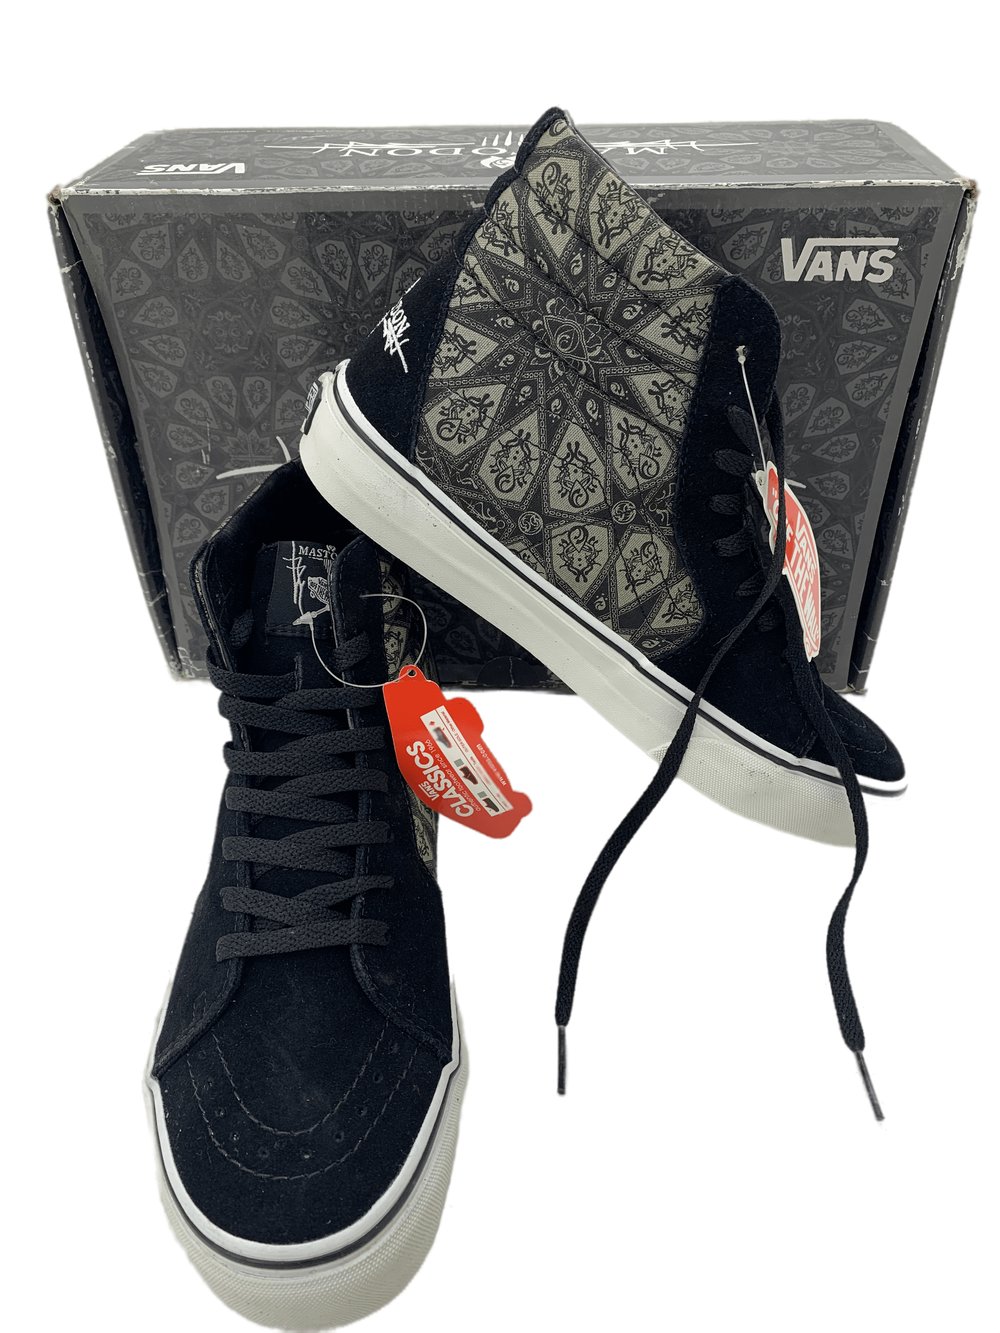 Fortaleza ropa Admirable Mastodon Bladecatcher Vans Sk8-Hi Top Shoes / Vintage Limited Edition  (Shipping Included in Price) — Anchorscreen Printing Cheap Thrills Oliver  Peck